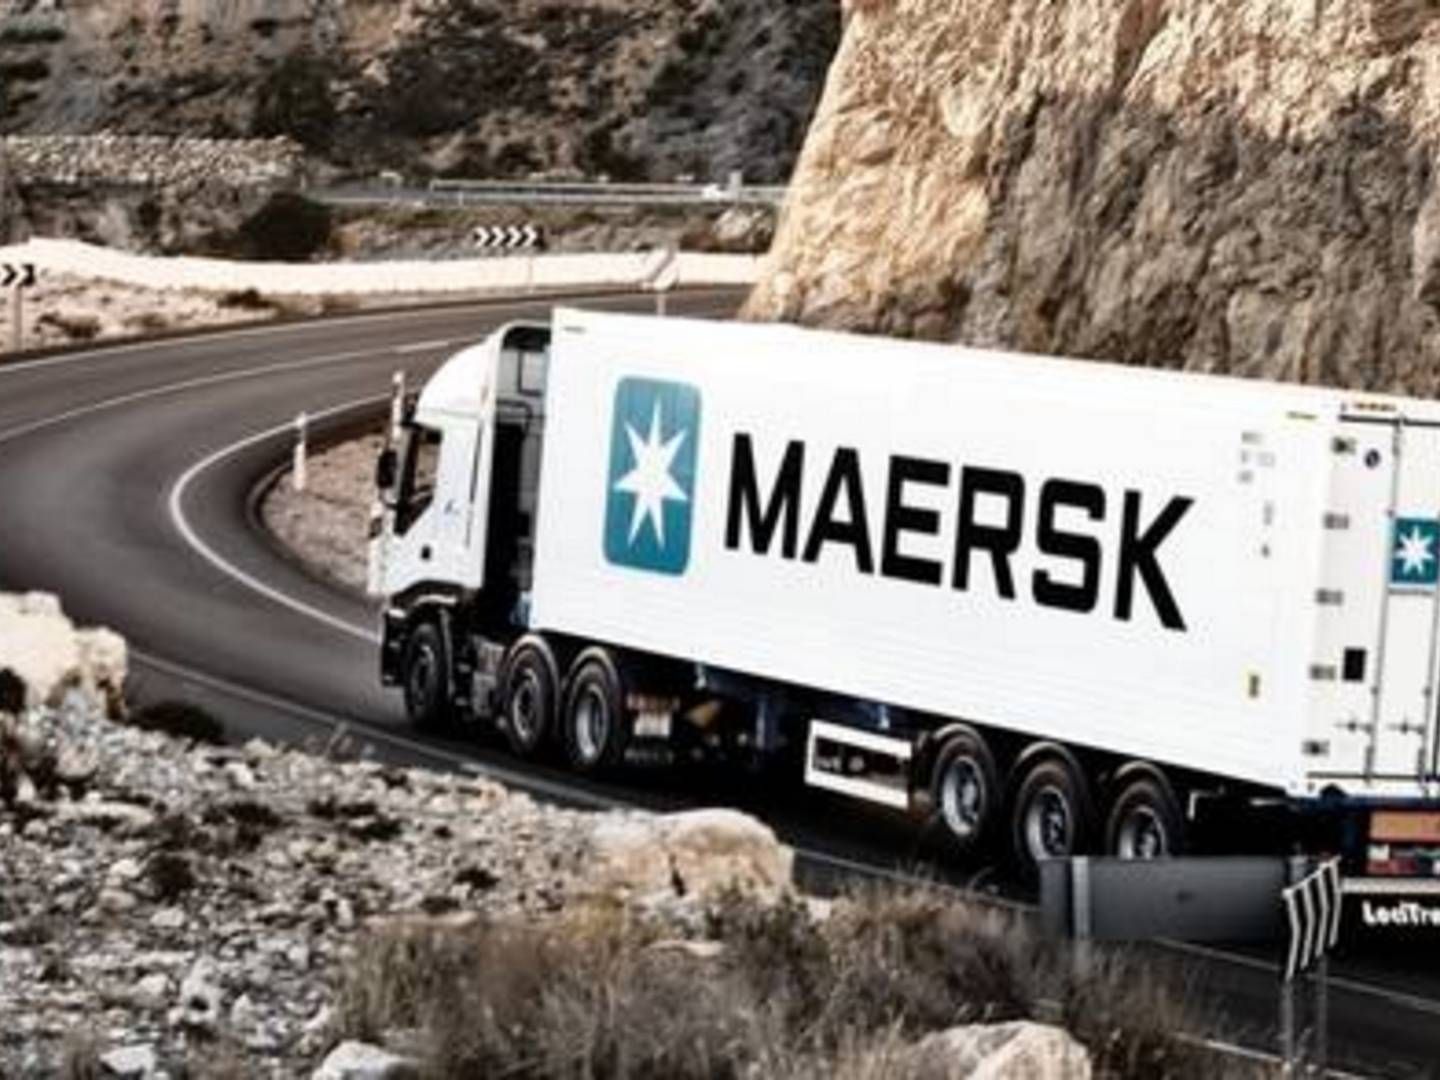 "It requires a good amount of people," says Maersk CEO Søren Skou on the contract with Vestas. | Photo: A.P. MØLLER-MÆRSK/PR